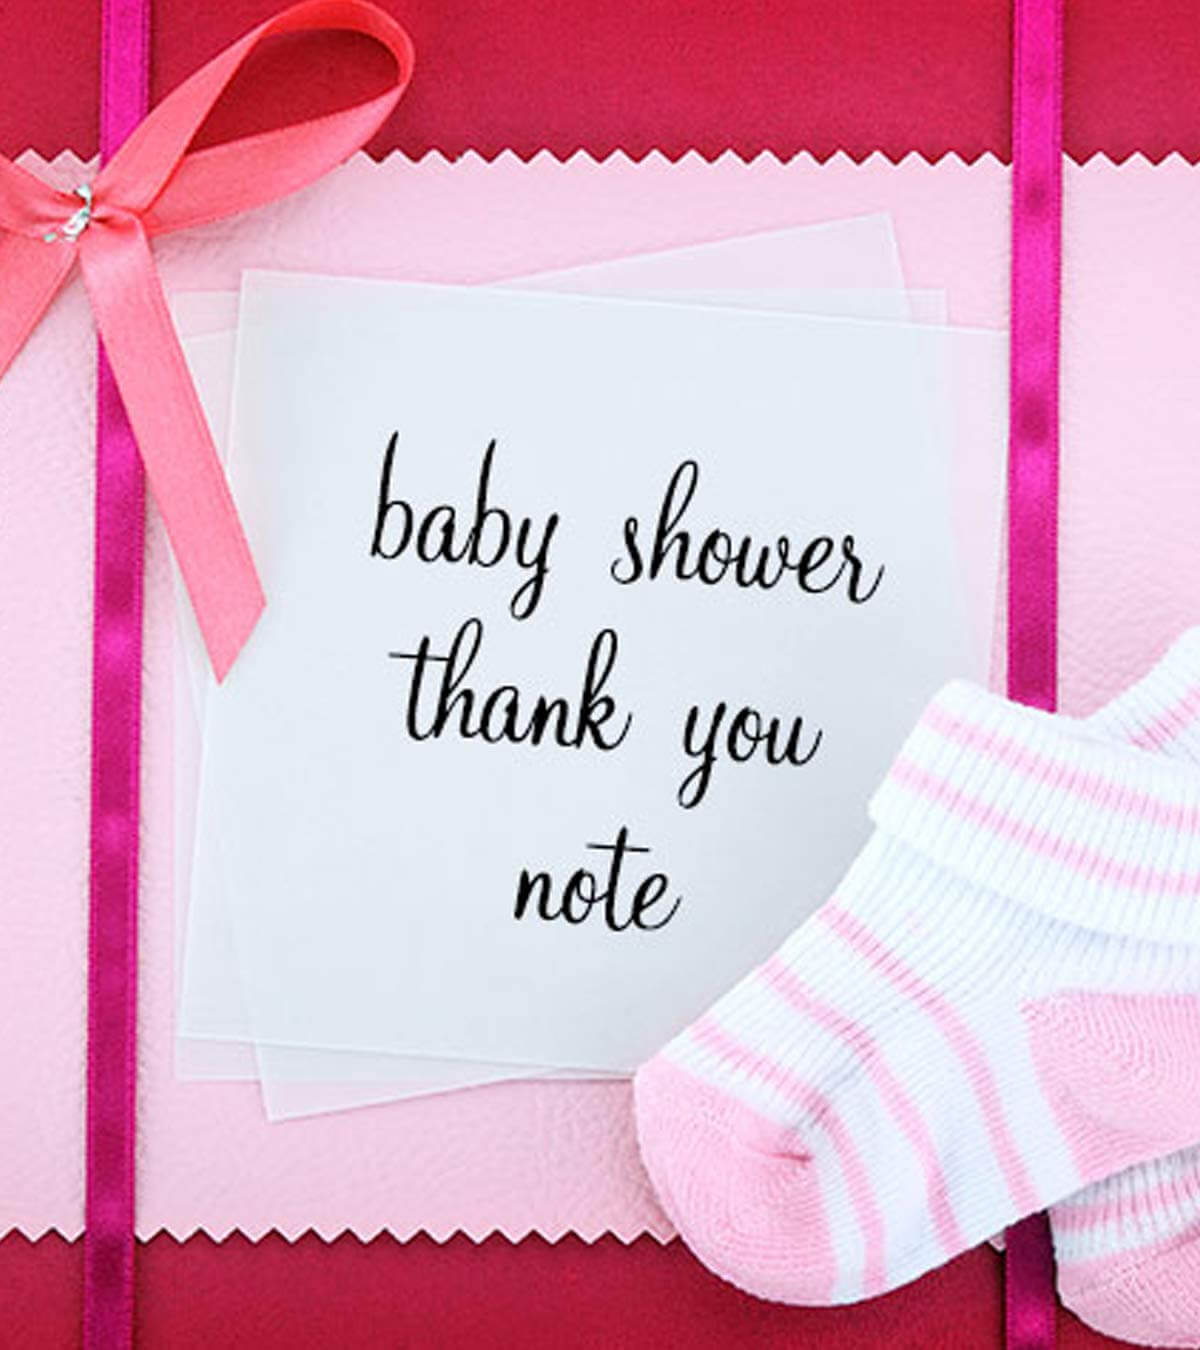 Baby Shower Thank You Notes: What To Write In A Thank You Card Throughout Template For Baby Shower Thank You Cards